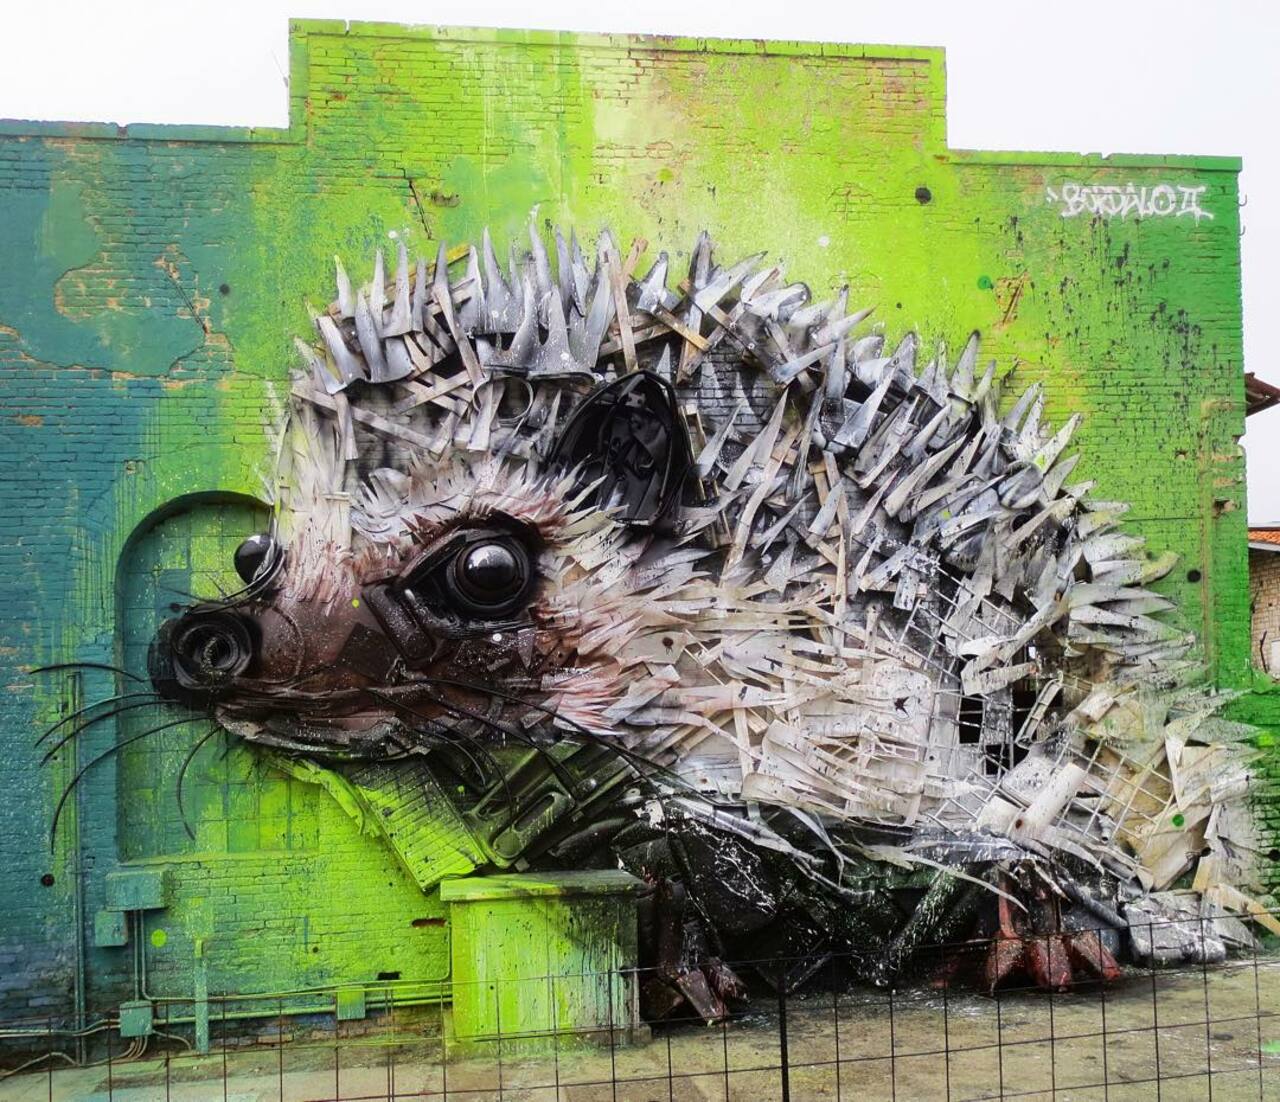 Something new from Bordalo II made using trash and found materials in Este, Italy. #StreetArt #Graffiti #Mural http://t.co/coFoy4NhqS